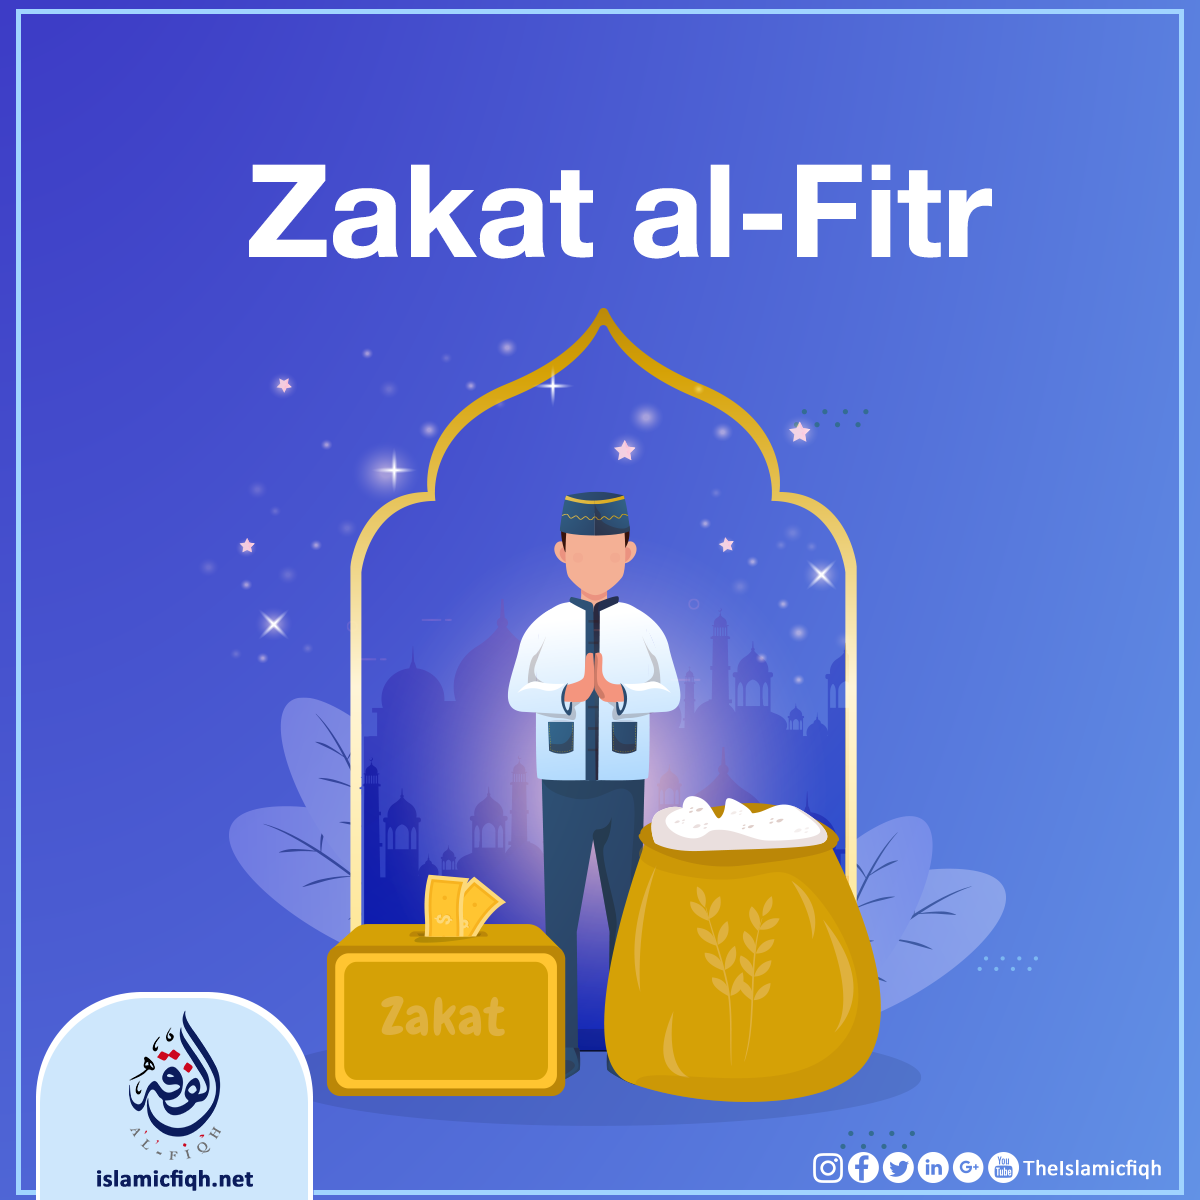 Zakat alFitr Card Islamic Fiqh Your easy way to learn about the